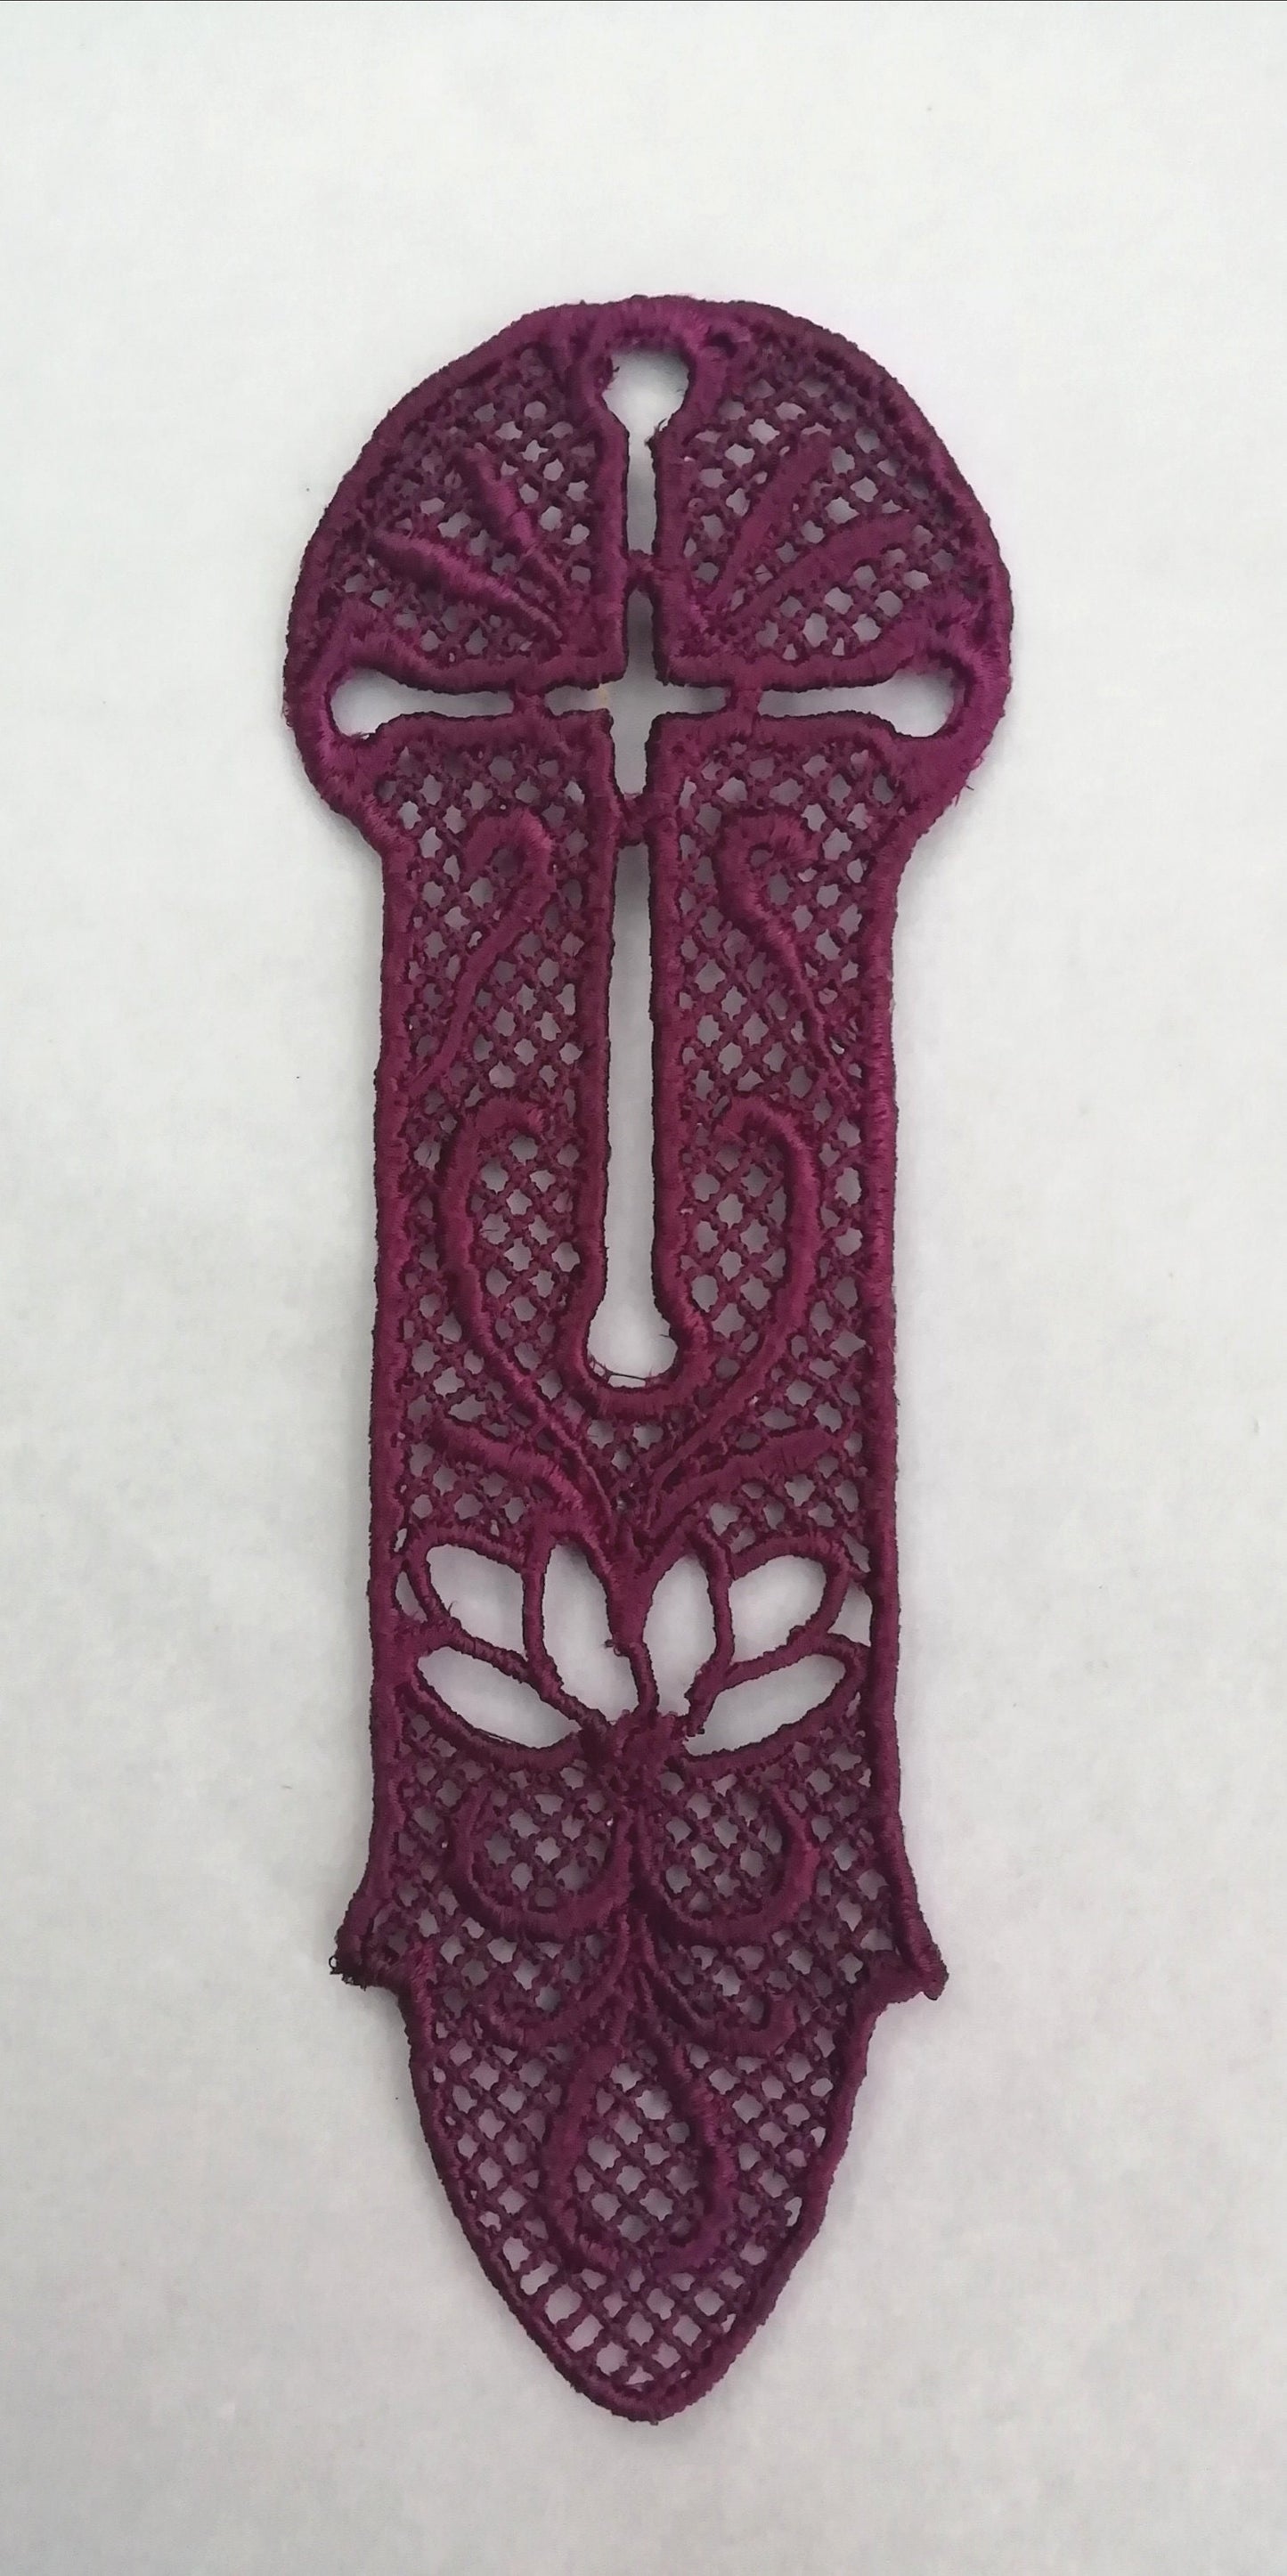 Free Standing Lace Bookmarks, Religious Bookmarks, Bookmarks, Missal  Bookmarks, Bible Bookmarks, Book lover gift, Lace Anniversary (13th)